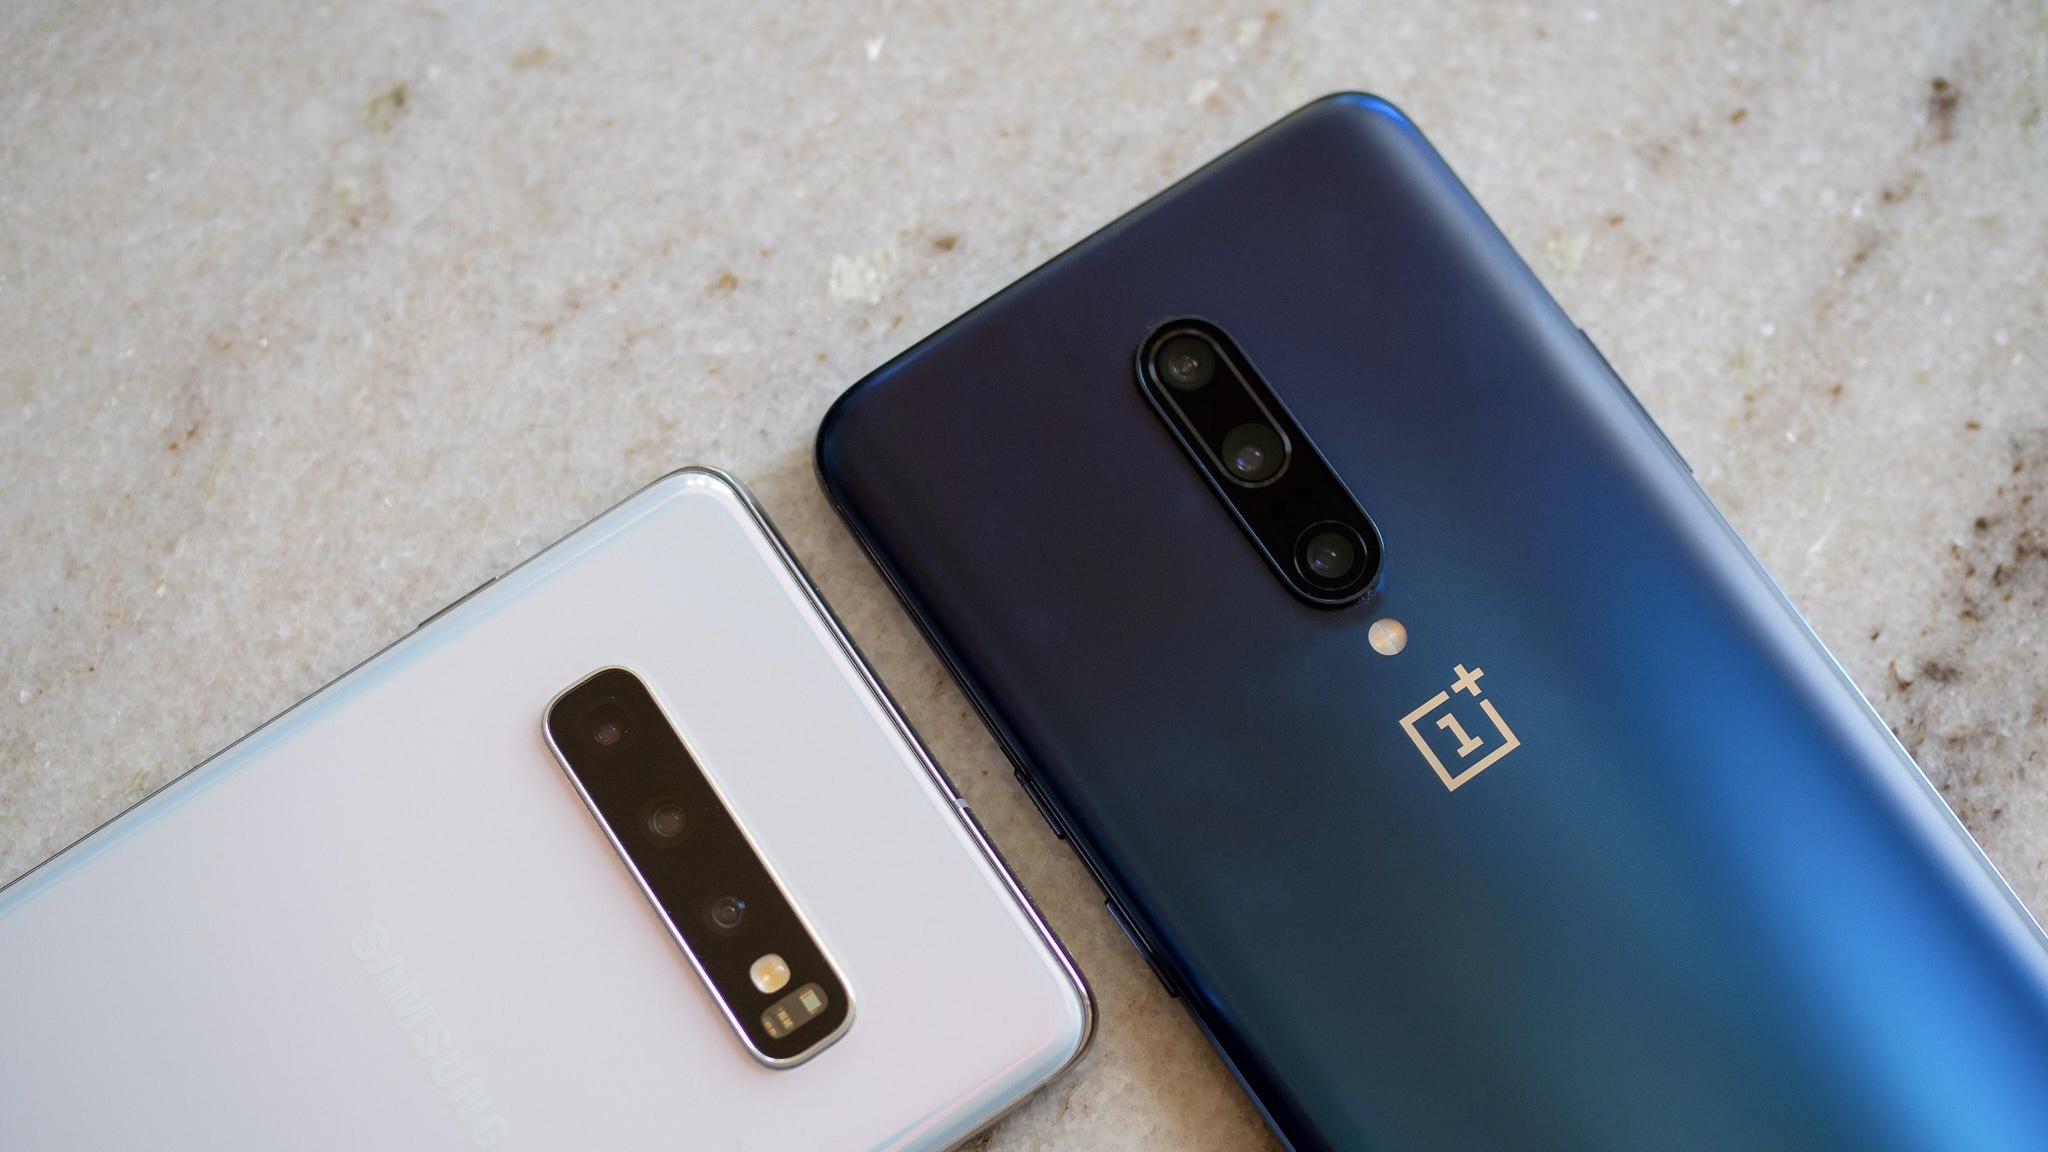 Galaxy S10 and Oneplus 7 Pro